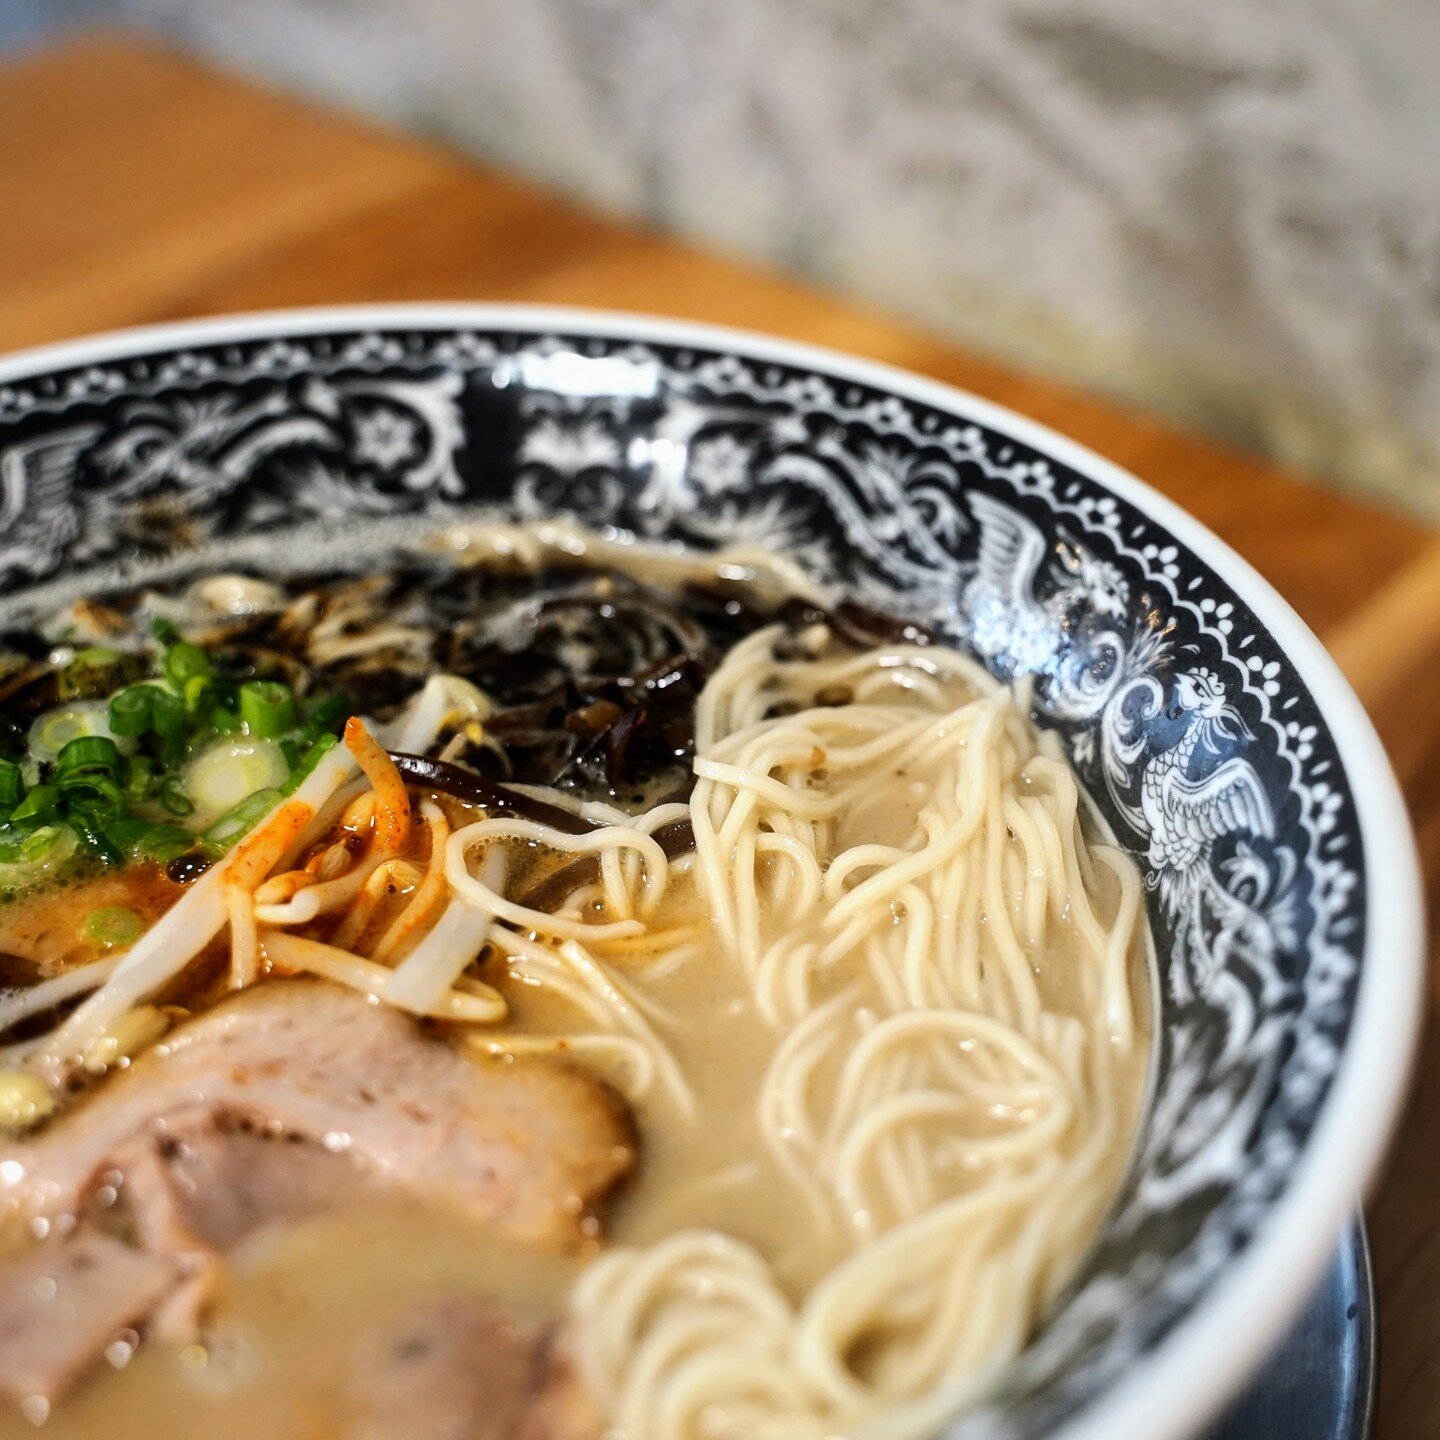 Come expand your tastebuds with our signature Tonkotsu Gachi with our homemade black garlic oil💥 Be amazed as the soothing flavors of the broth evolve as you eat😚😄😇

🍜JAPANESE RAMEN GACHI🍜
📍2268 W Holcombe Blvd, Houston, TX 77030

#ramengachi 